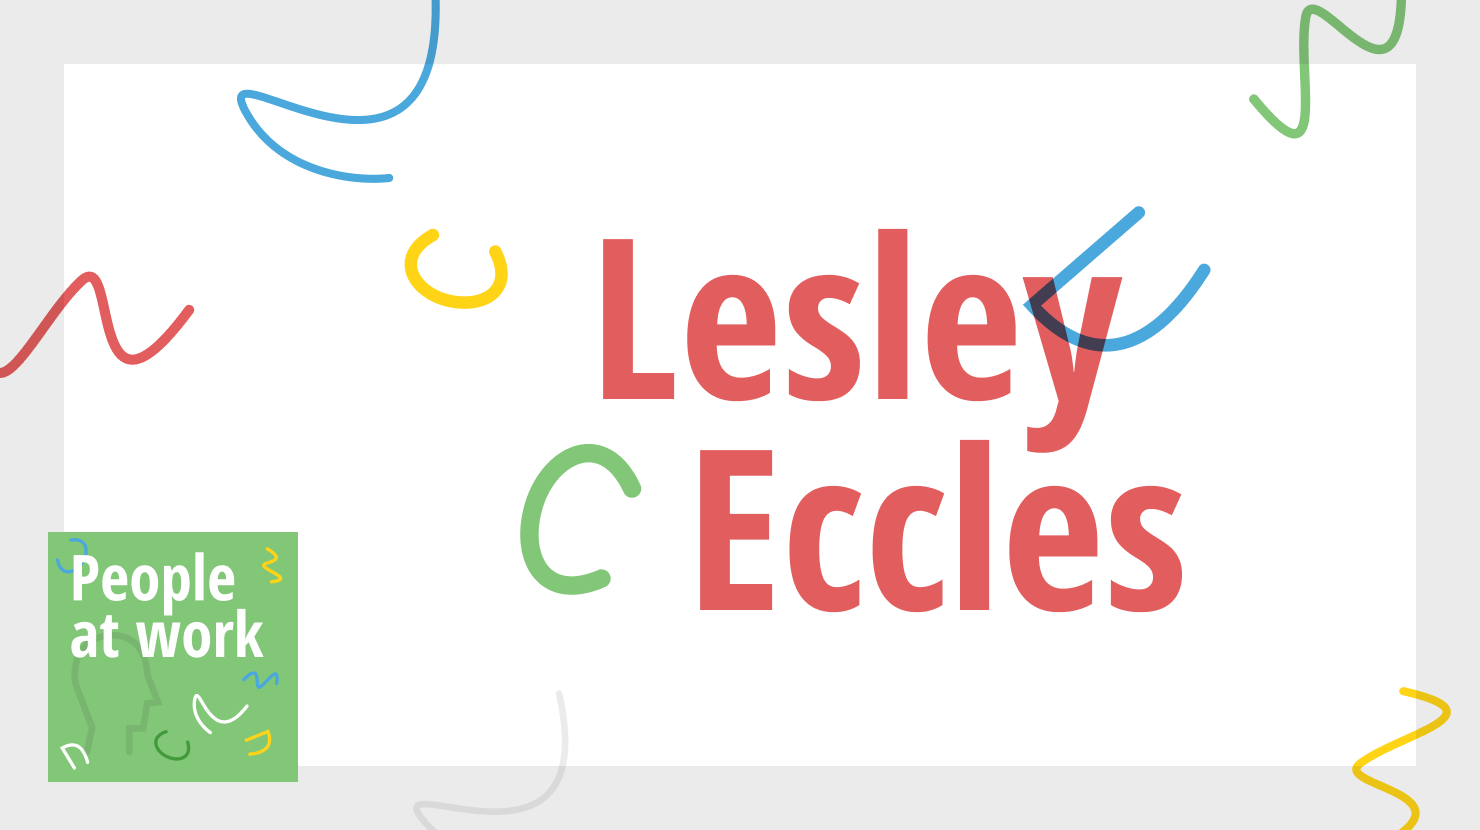 Success is all about relationships with Lesley Eccles